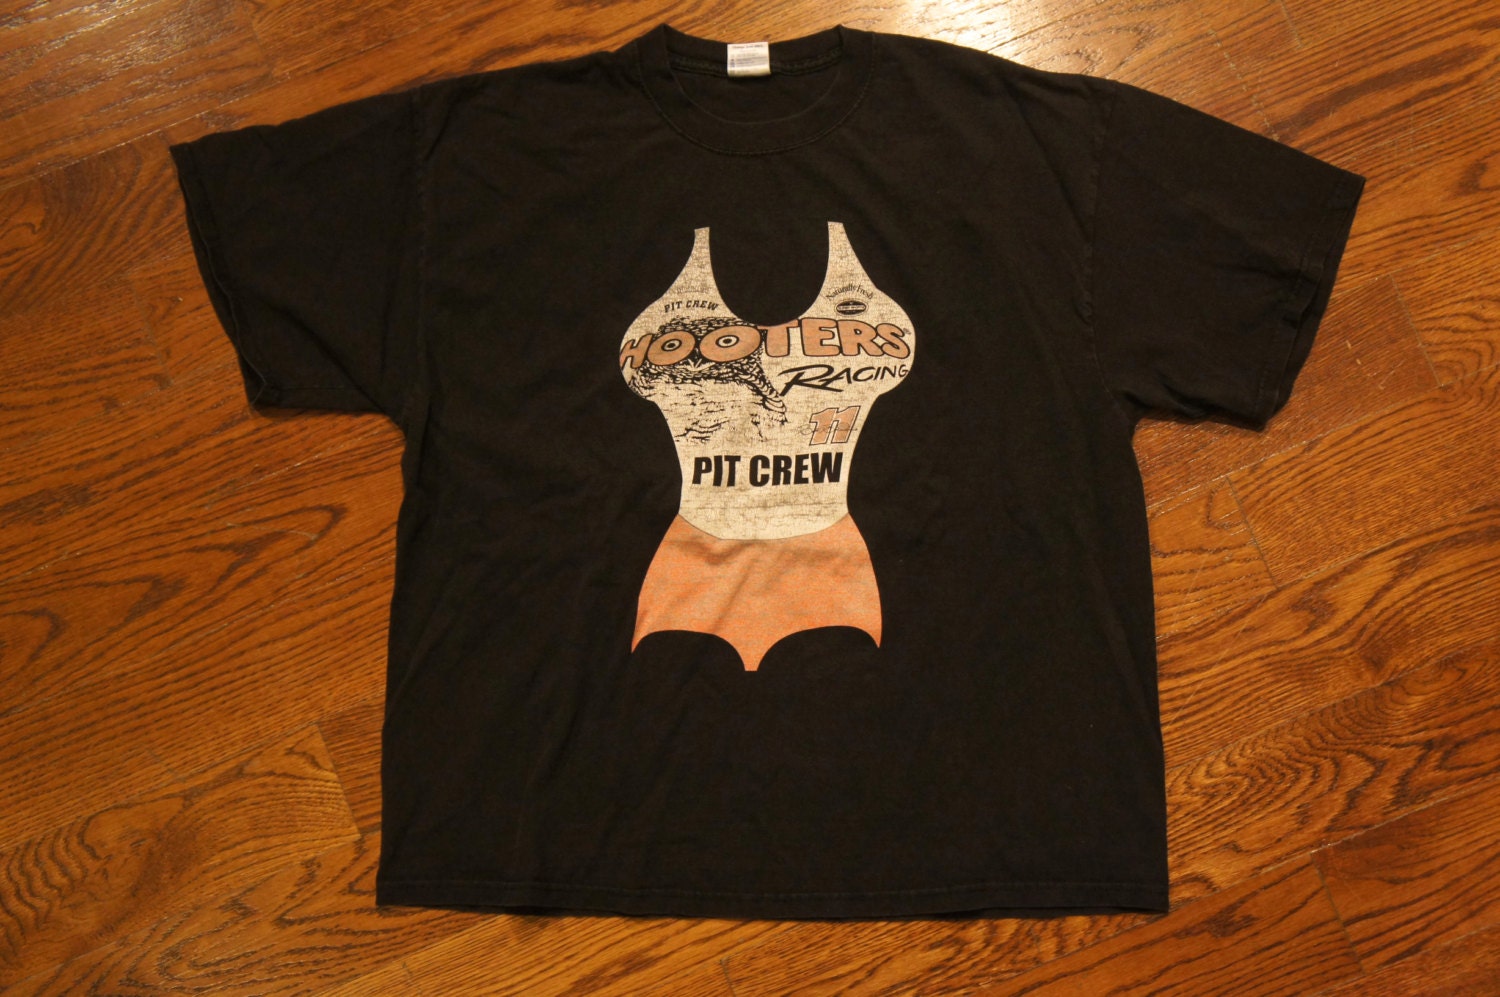 Hooters Racing Pit Crew Recycled Vintage T-Shirt by RagsOffTheRack